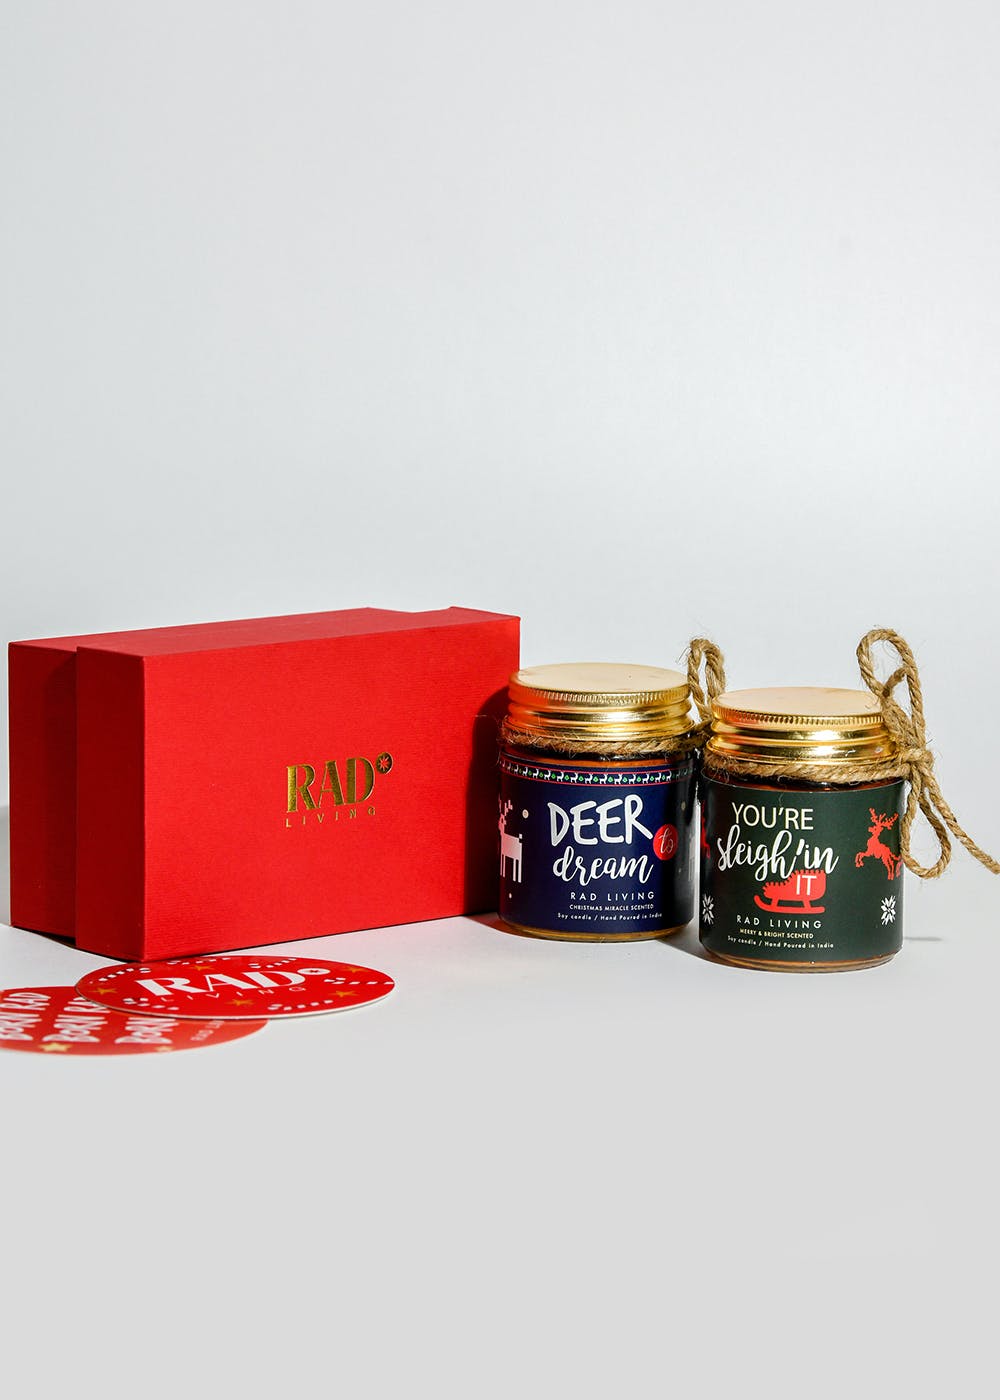 Gift Set of 2 Scented Candle Jars with Lid - Your Sleigh'in & Deer Dream